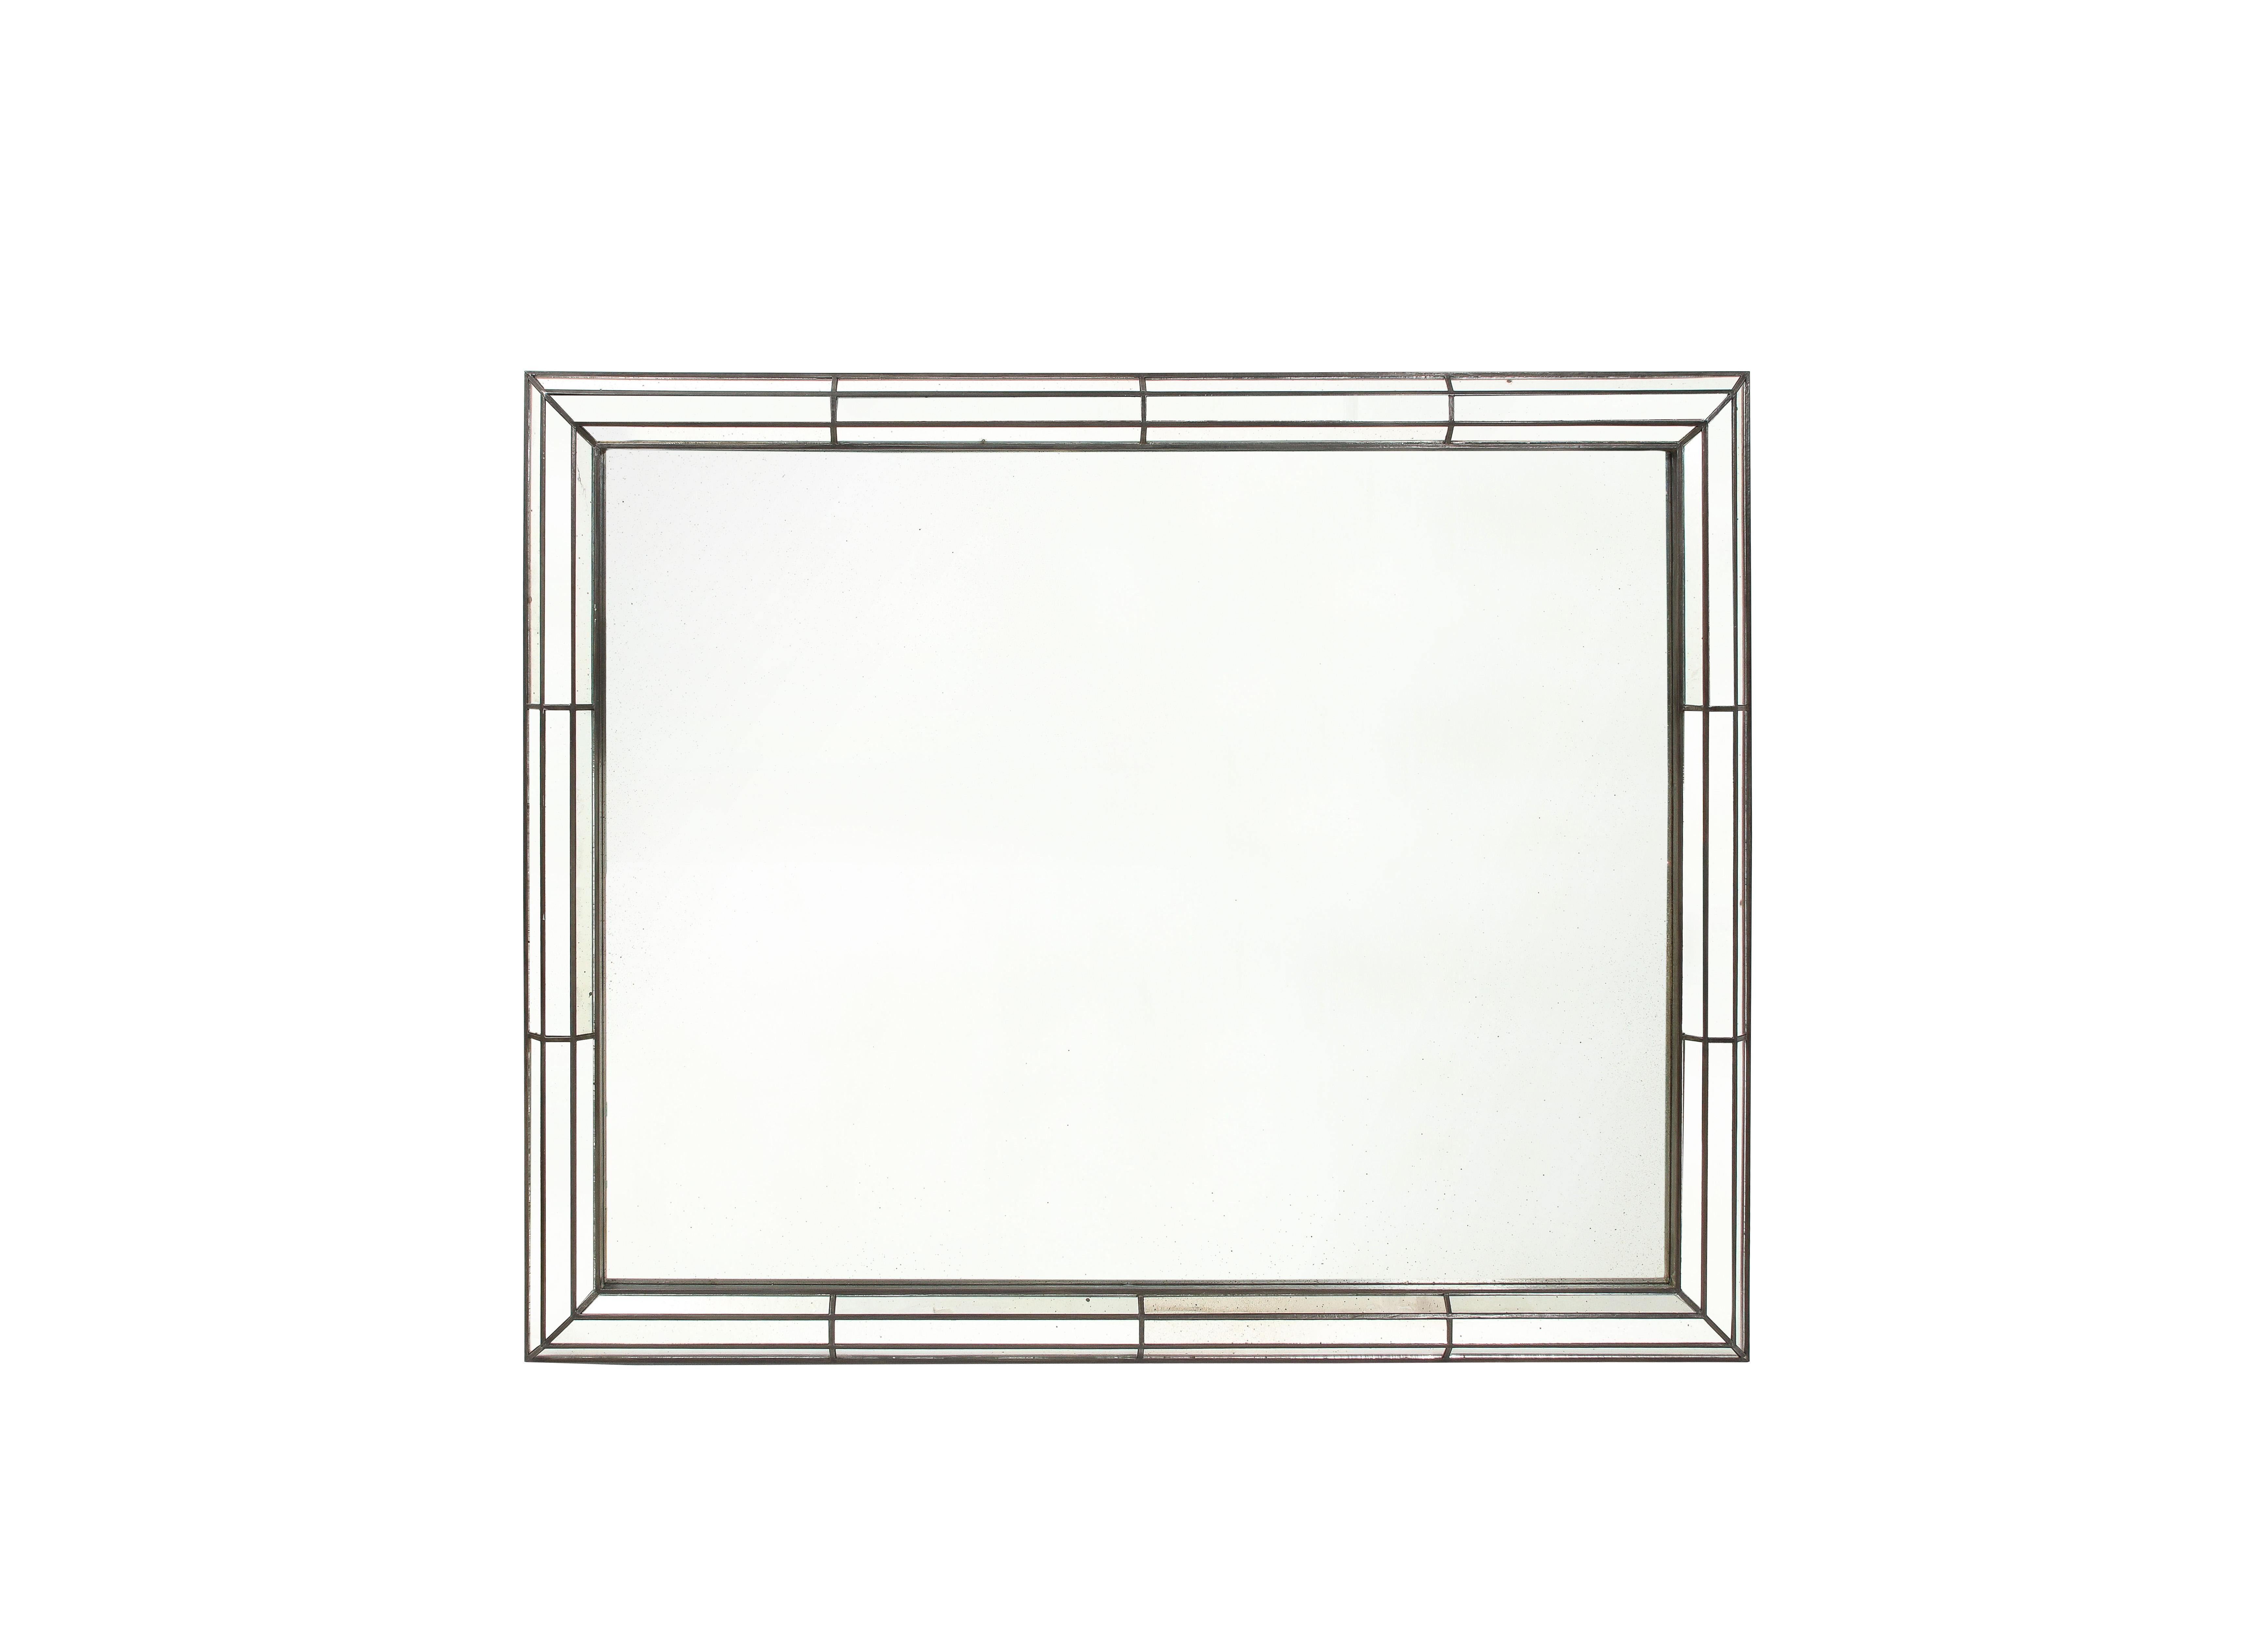 Custom fabricated rectangular with a three-section mirrored glass border surrounding a clear central mirror glass plate, the surrounding wood frame finished in silver metal leaf with a handsome dark patina.